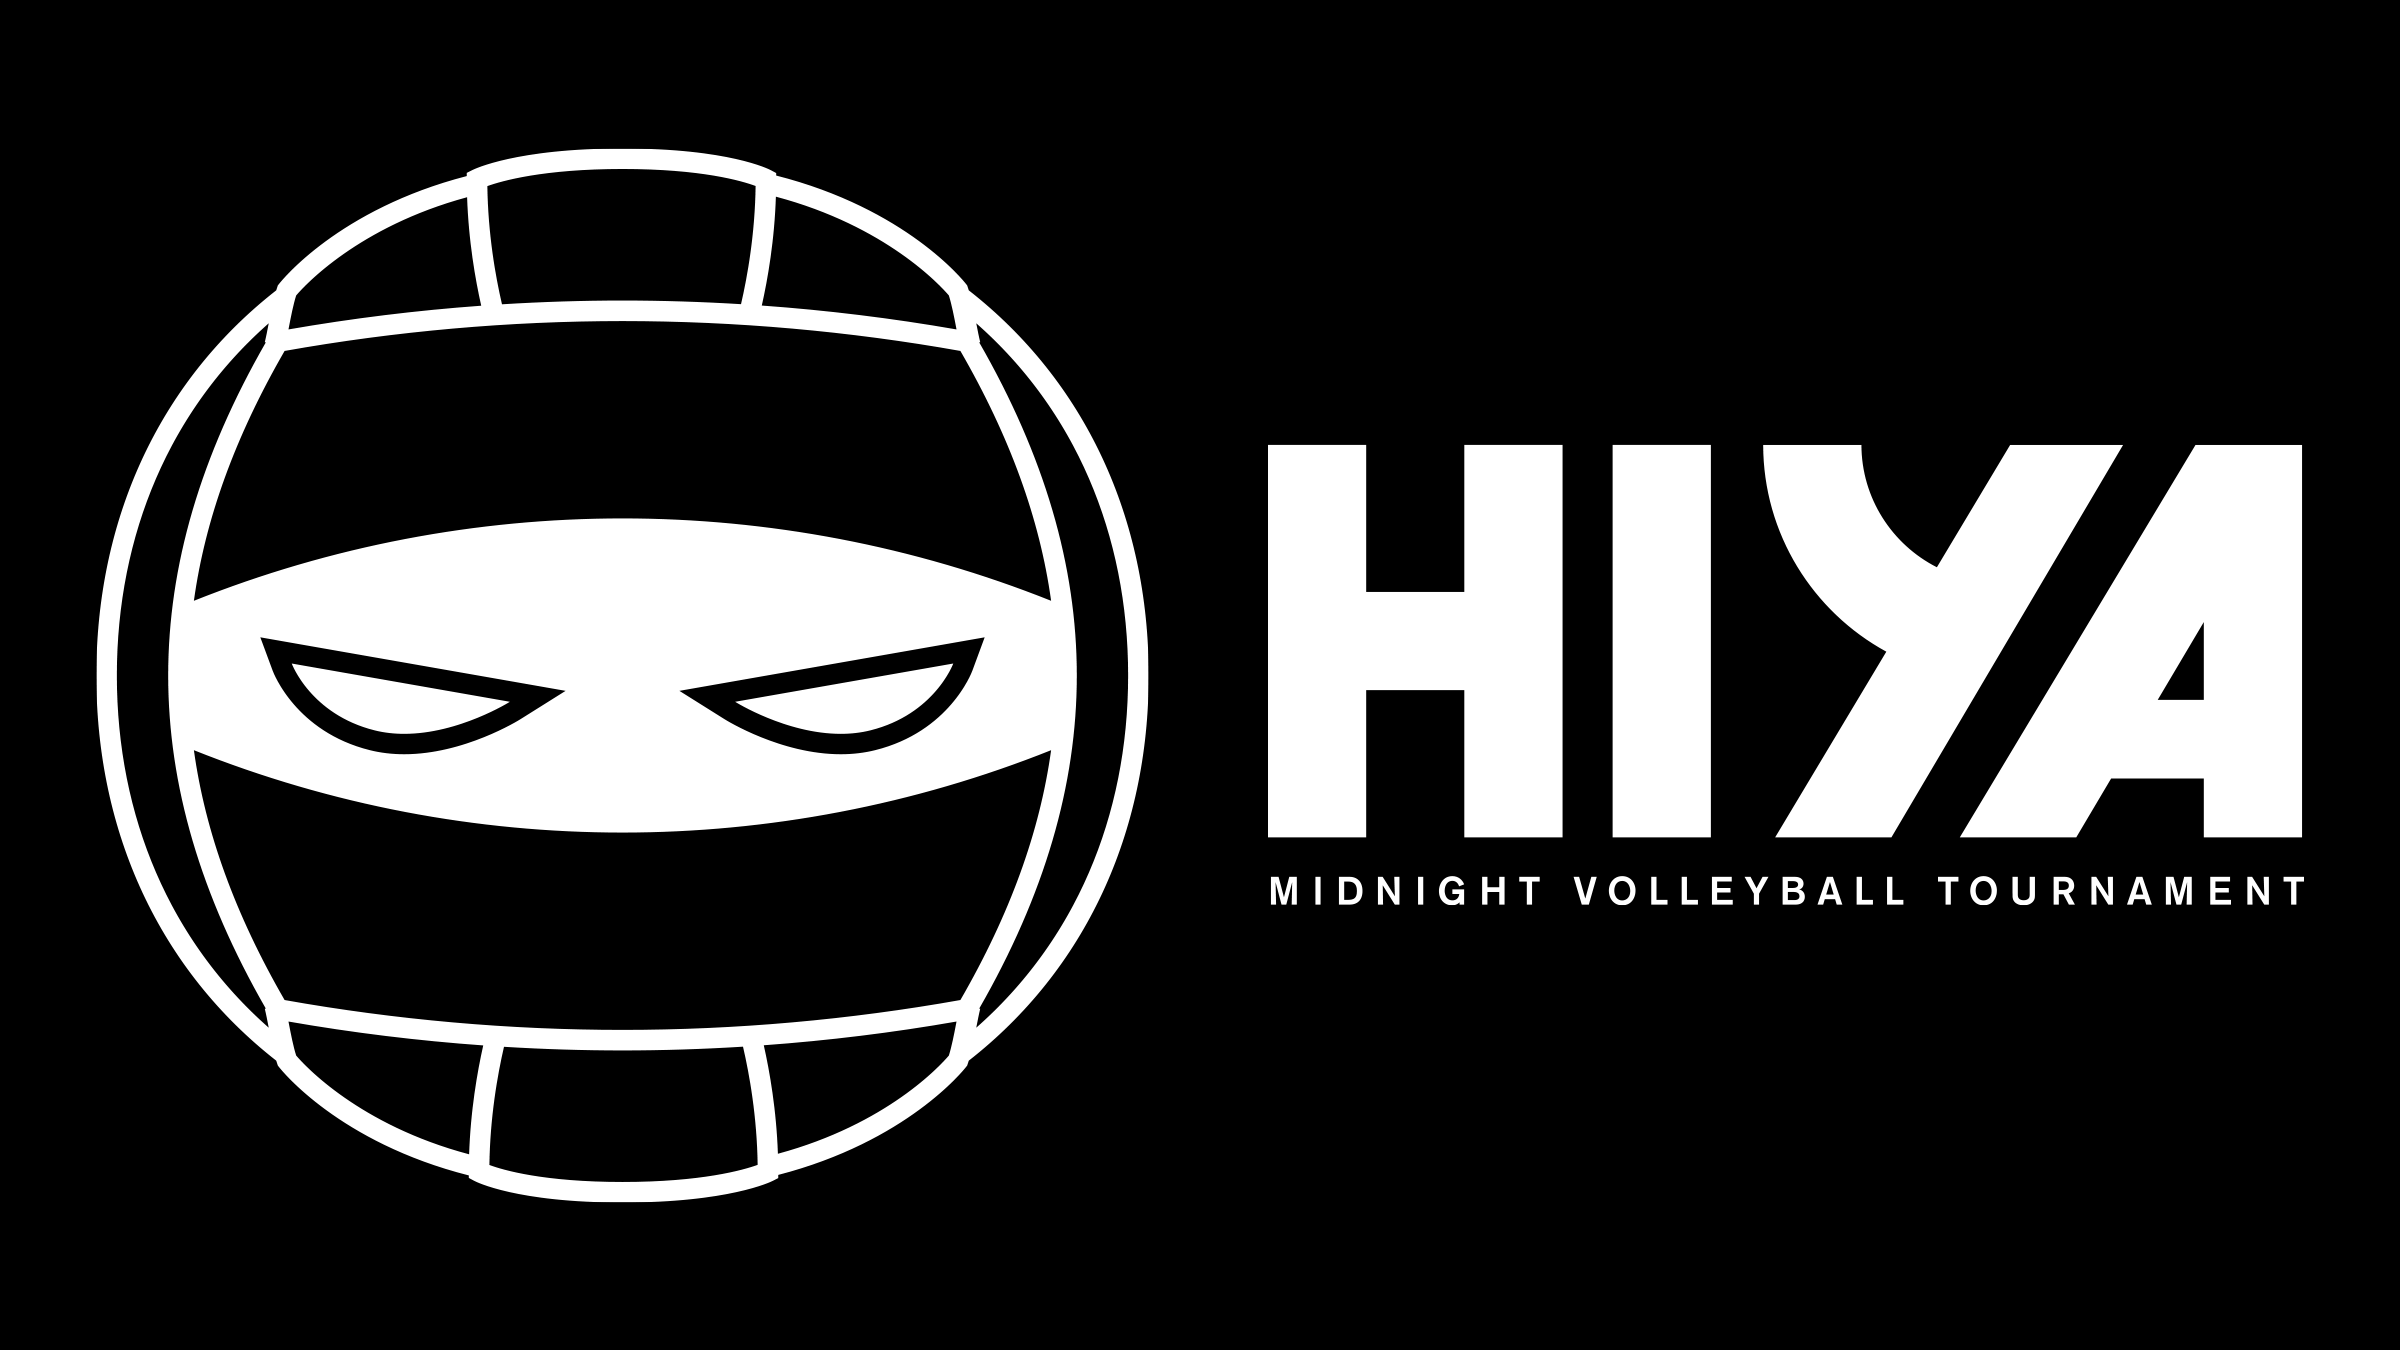 Large icon of volleyball combined with ninja eyes next to smaller text that says HIYA Midnight Volleyball Tournament